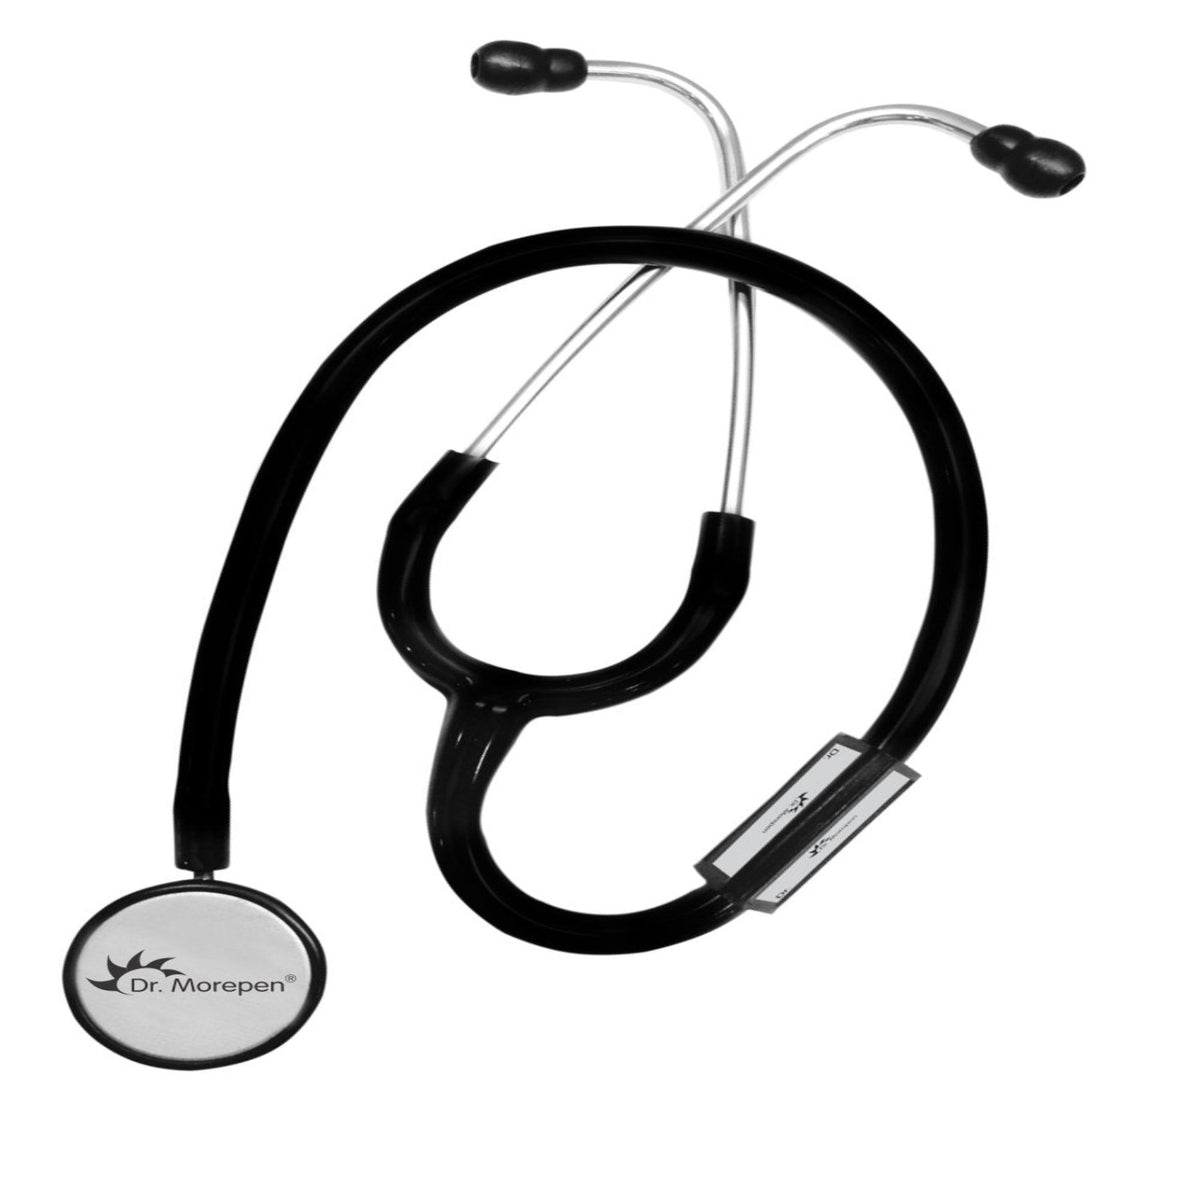 Dr Morepen ST 03 Dual Head Stethoscope